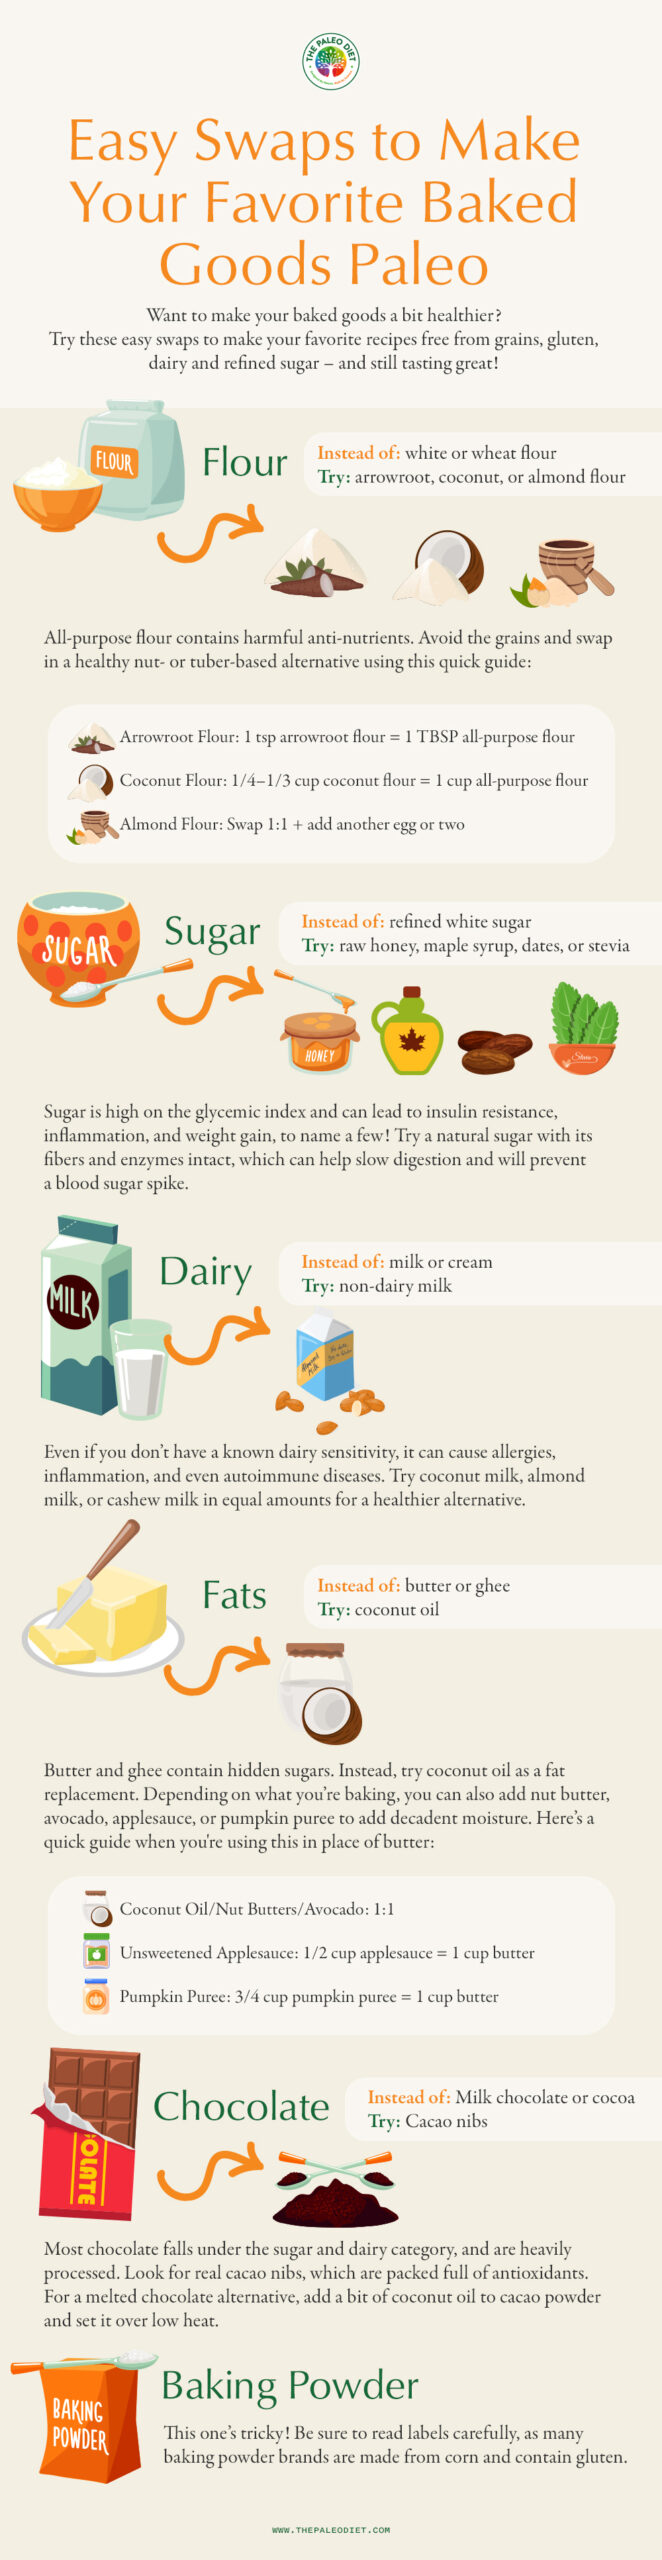 How Much Sugar Is in Your Fruit? - The Paleo Diet®